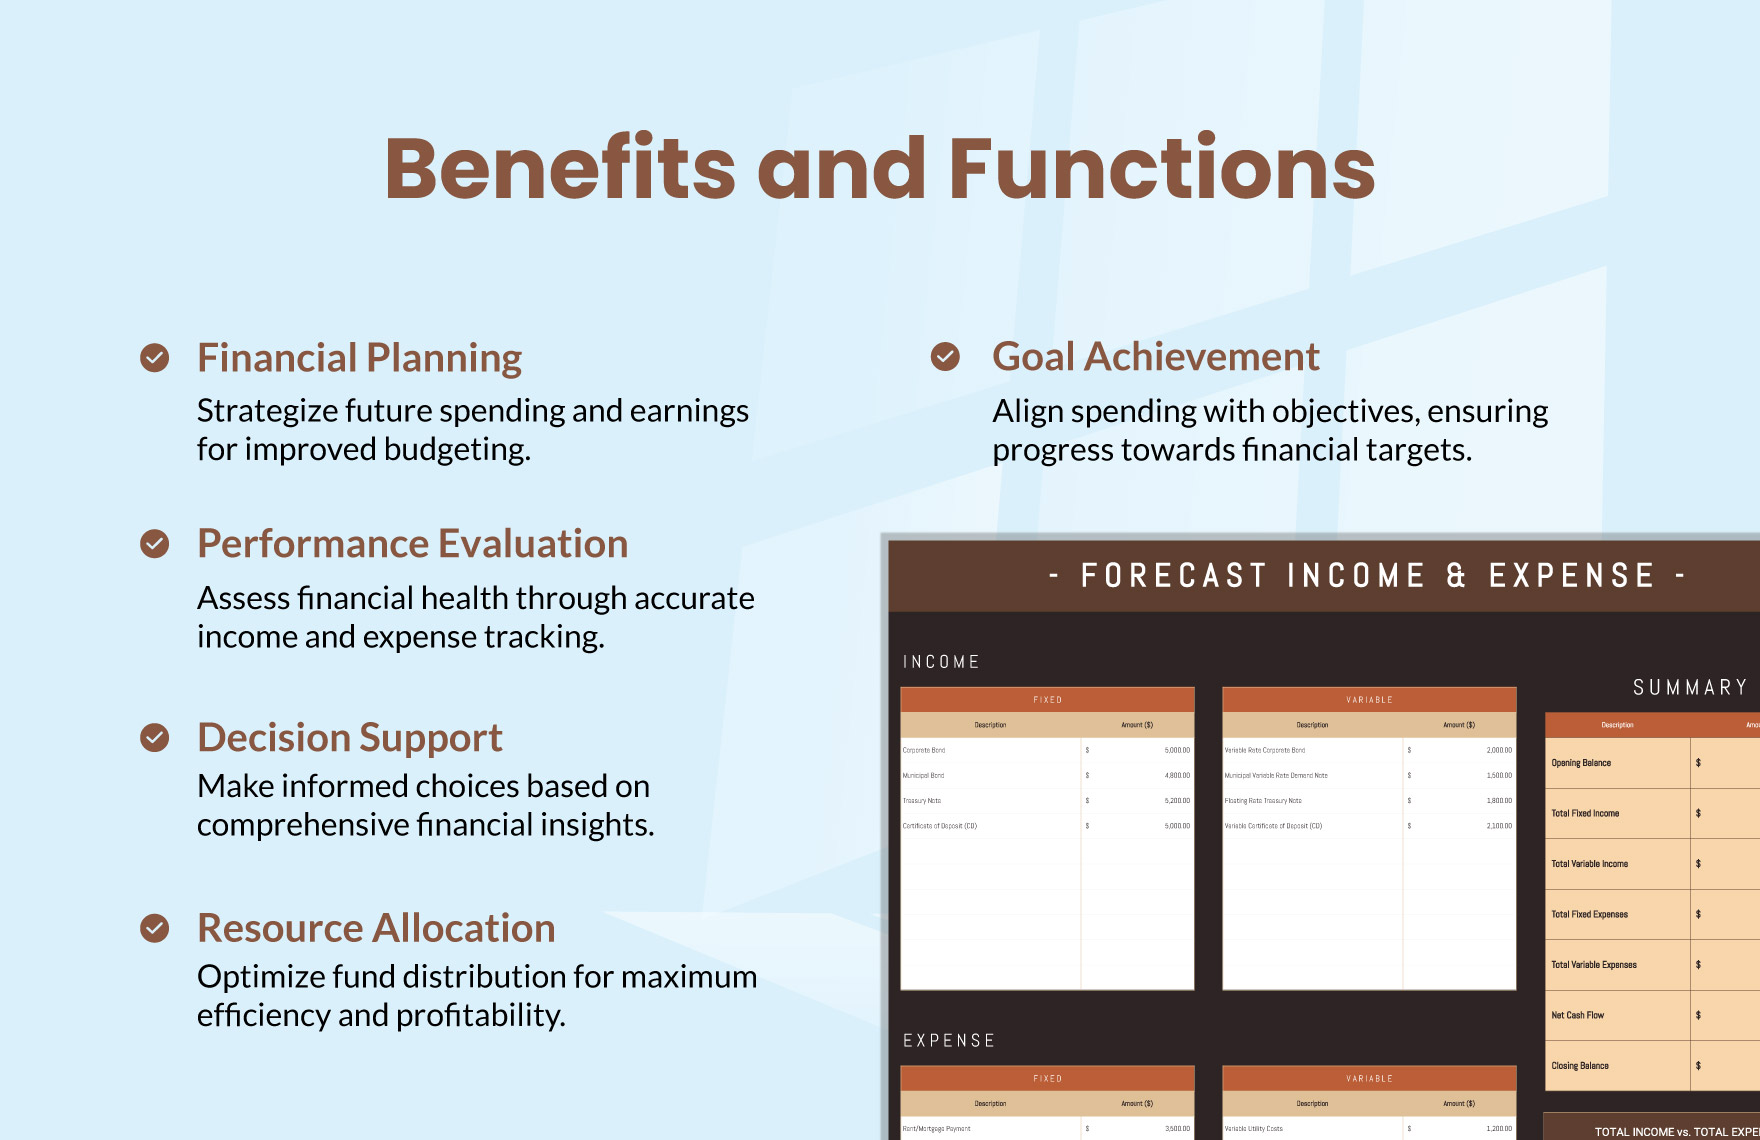 Forecast Income and Expense Template